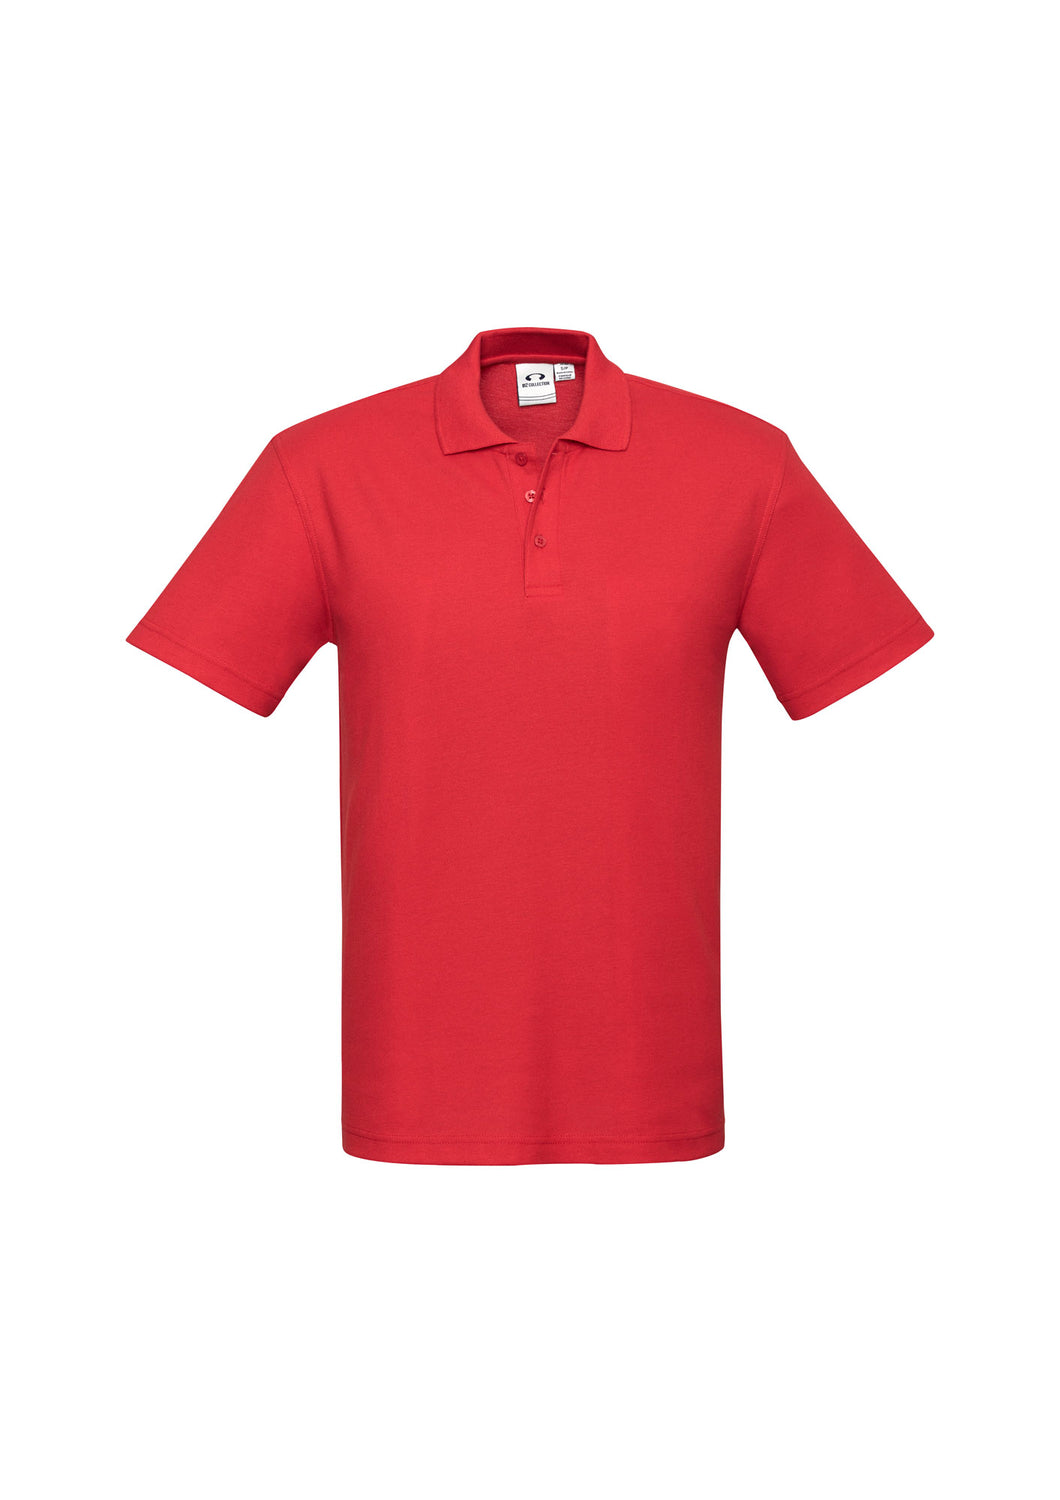 Men's Classic Pique Knit Polo - Red